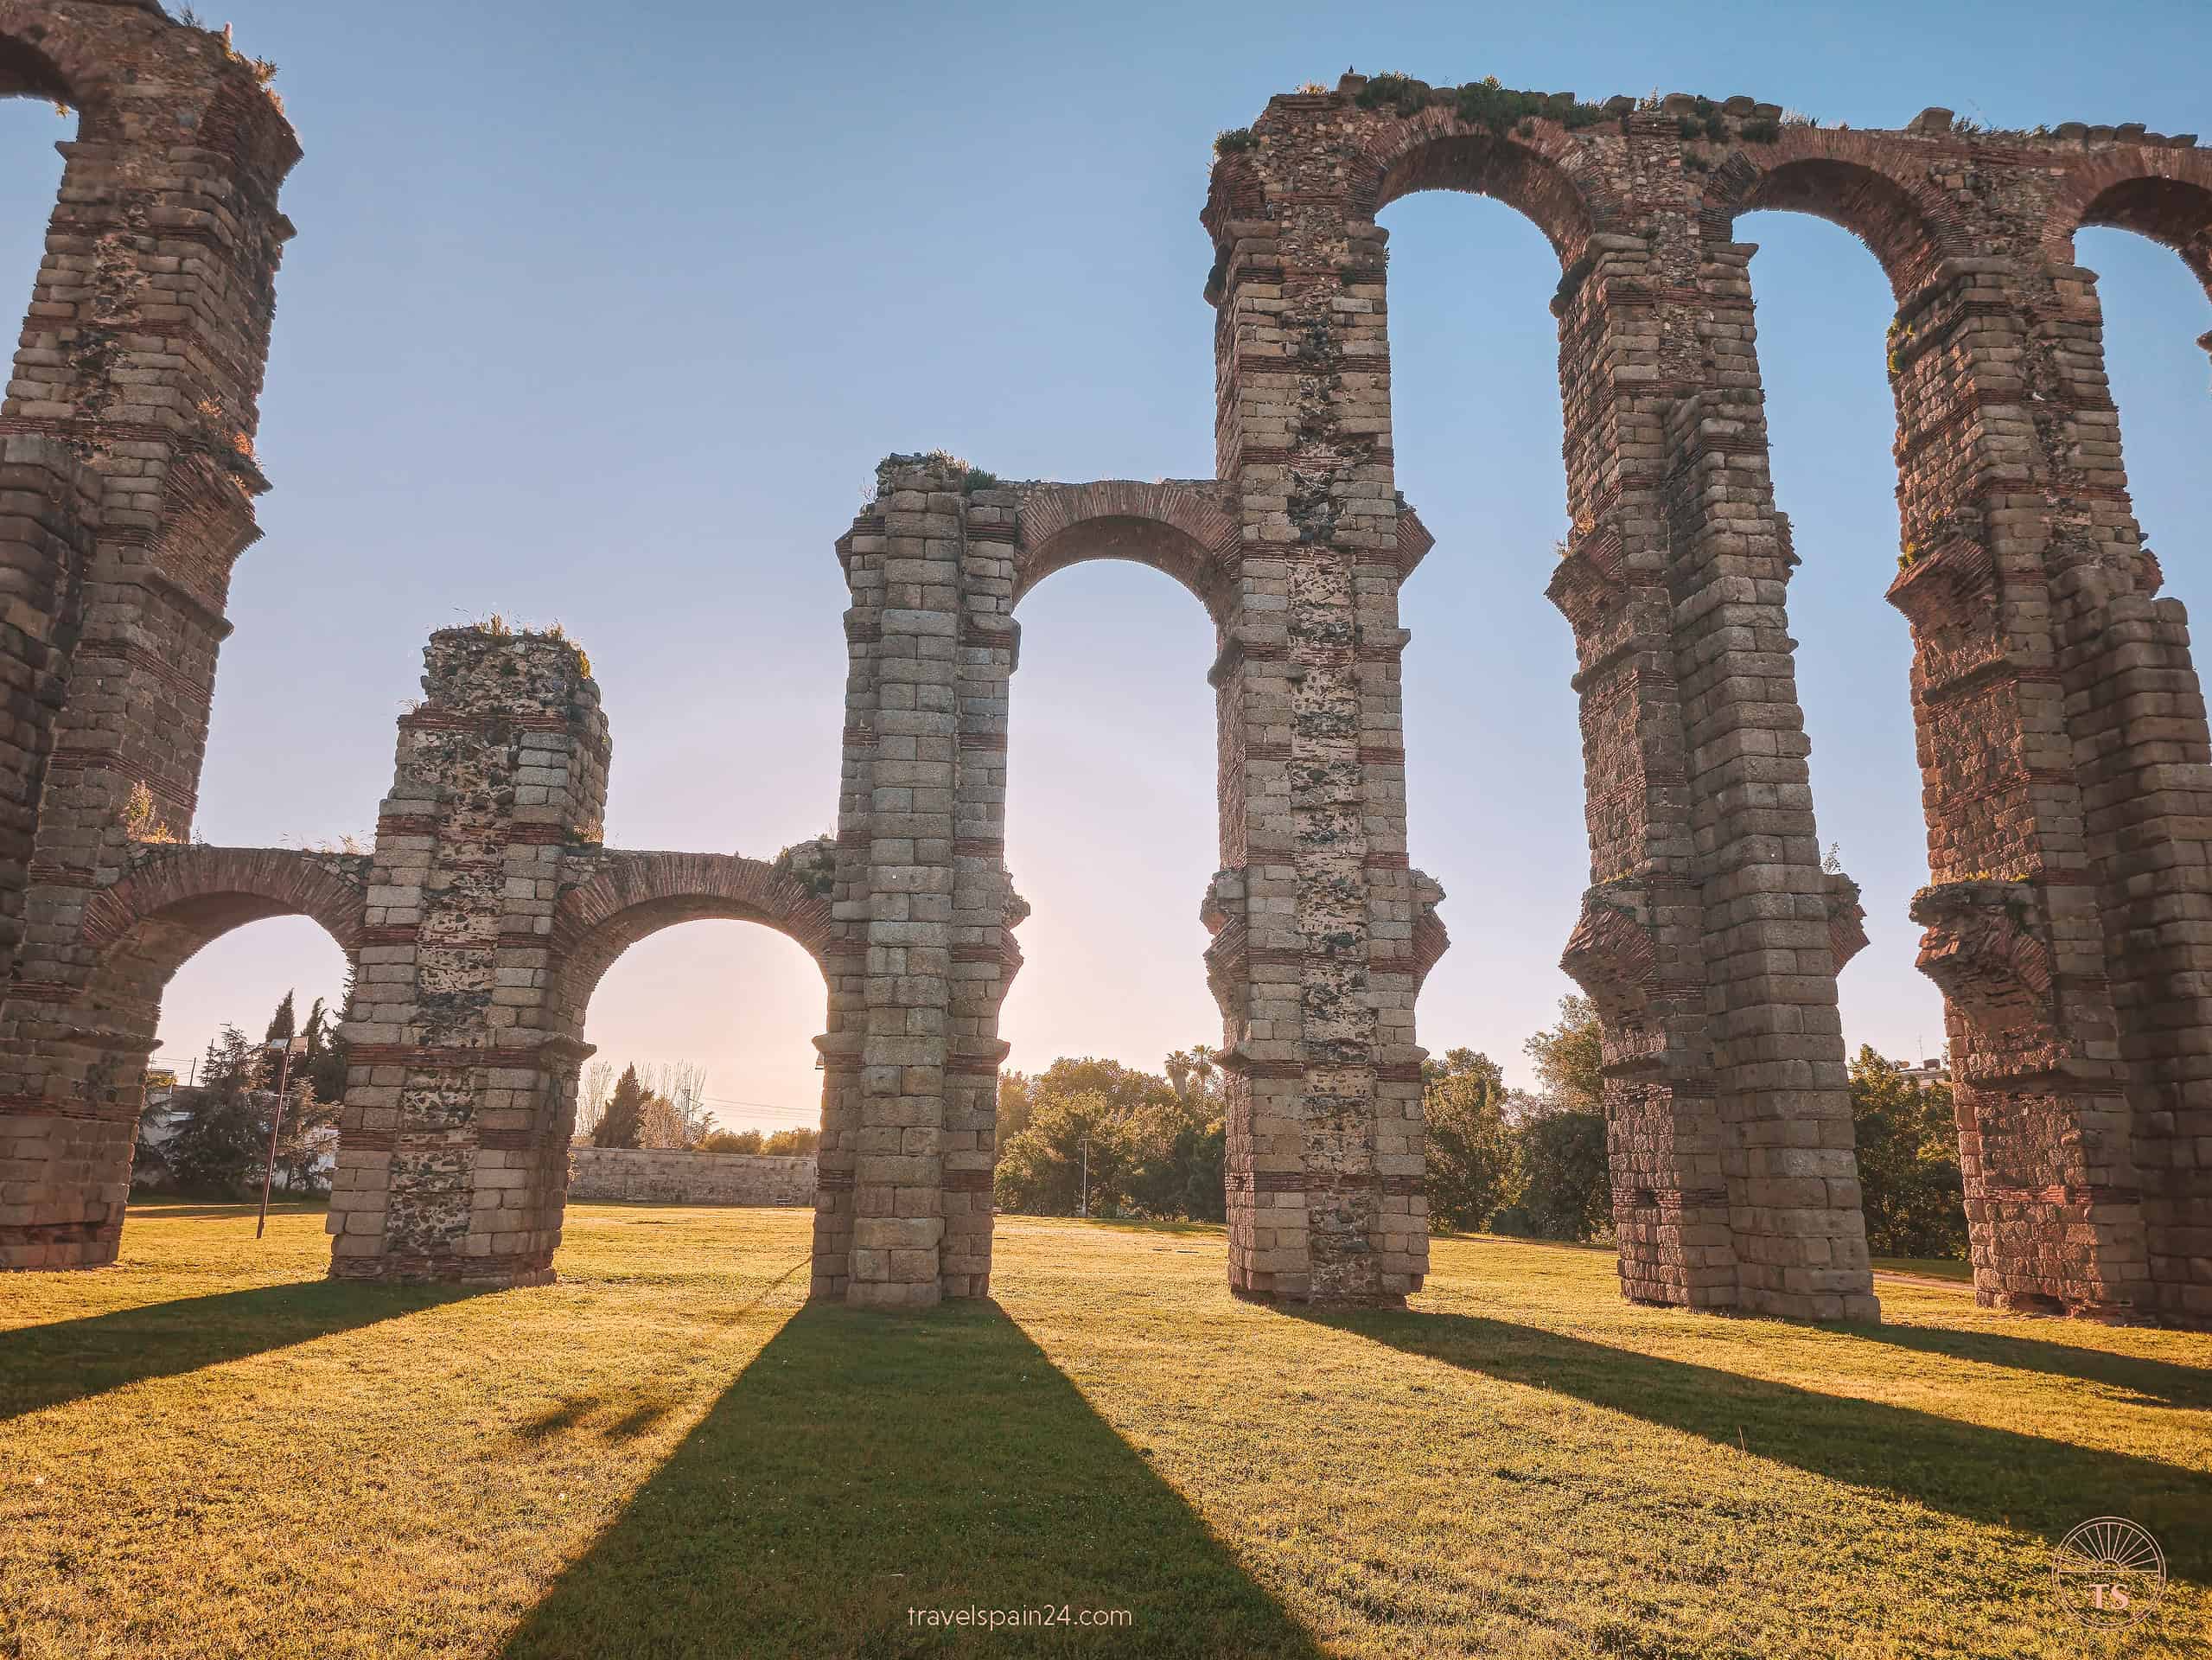 Sunset at Acueducto de los Milagros in Mérida, with the shadows of the aqueduct's pillars cast across the green grass and the sun setting behind, creating a stunning visual effect.